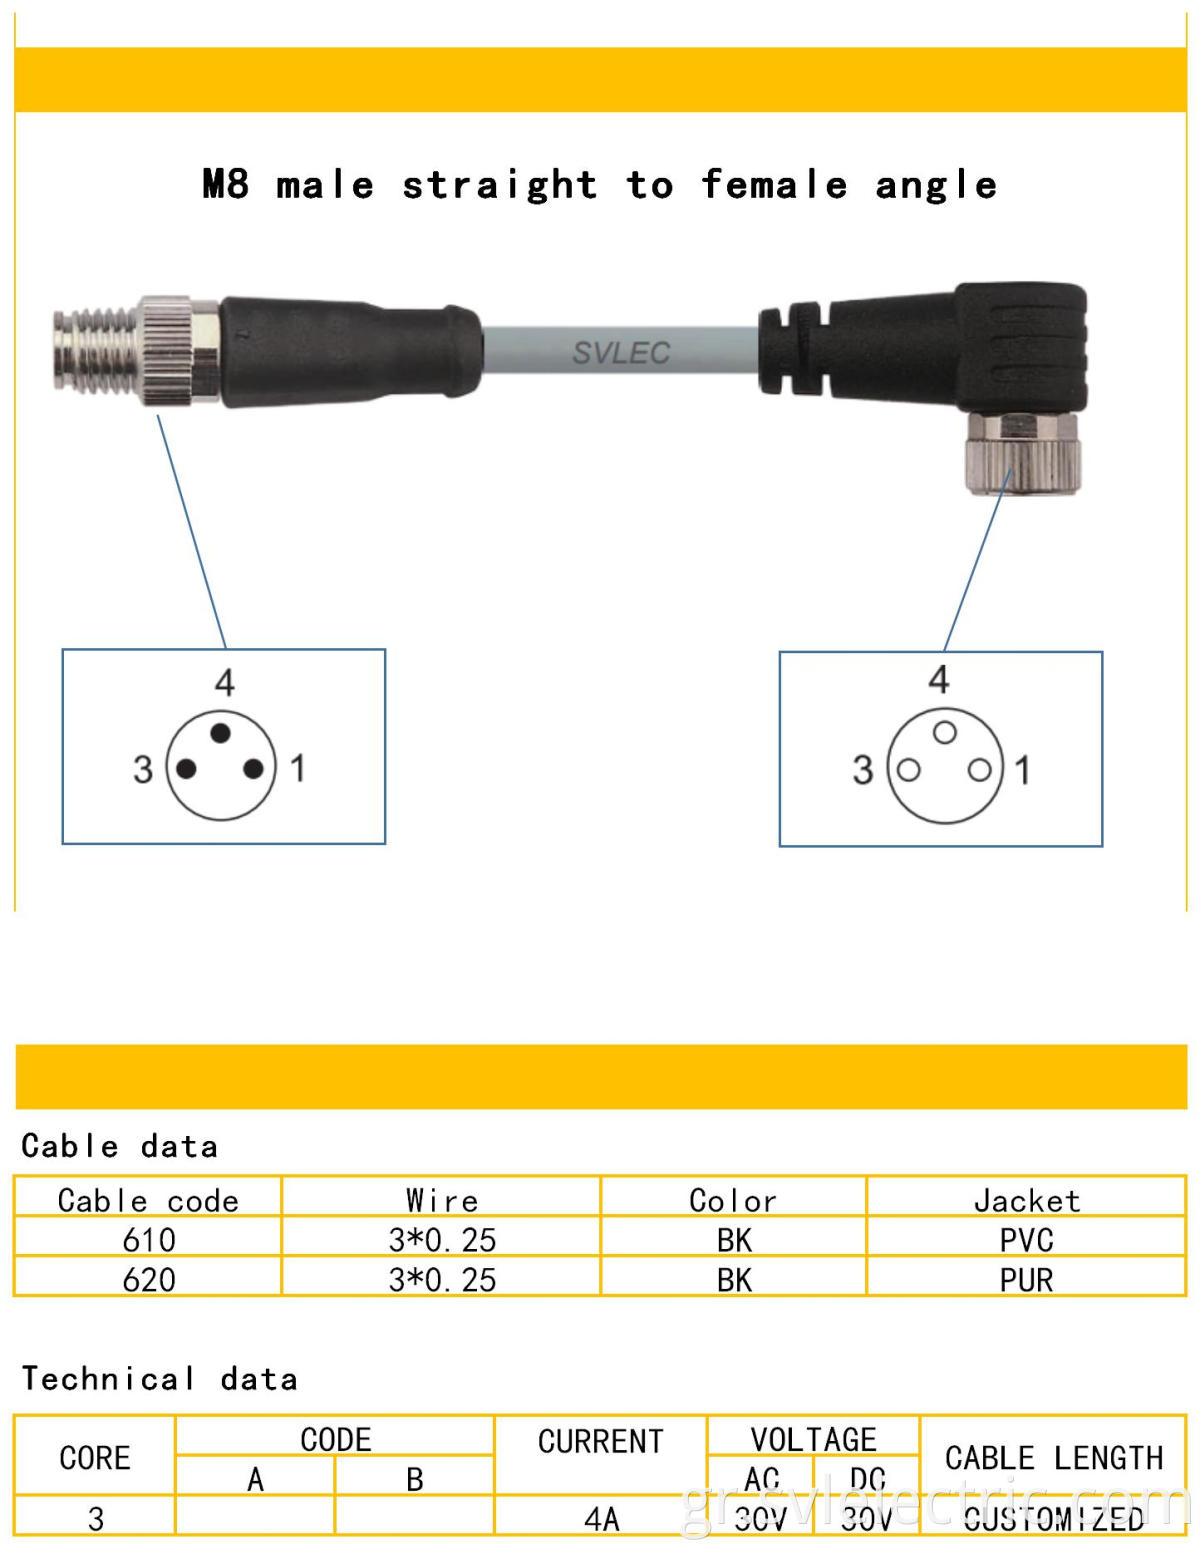 M8 male straight to female angle connector